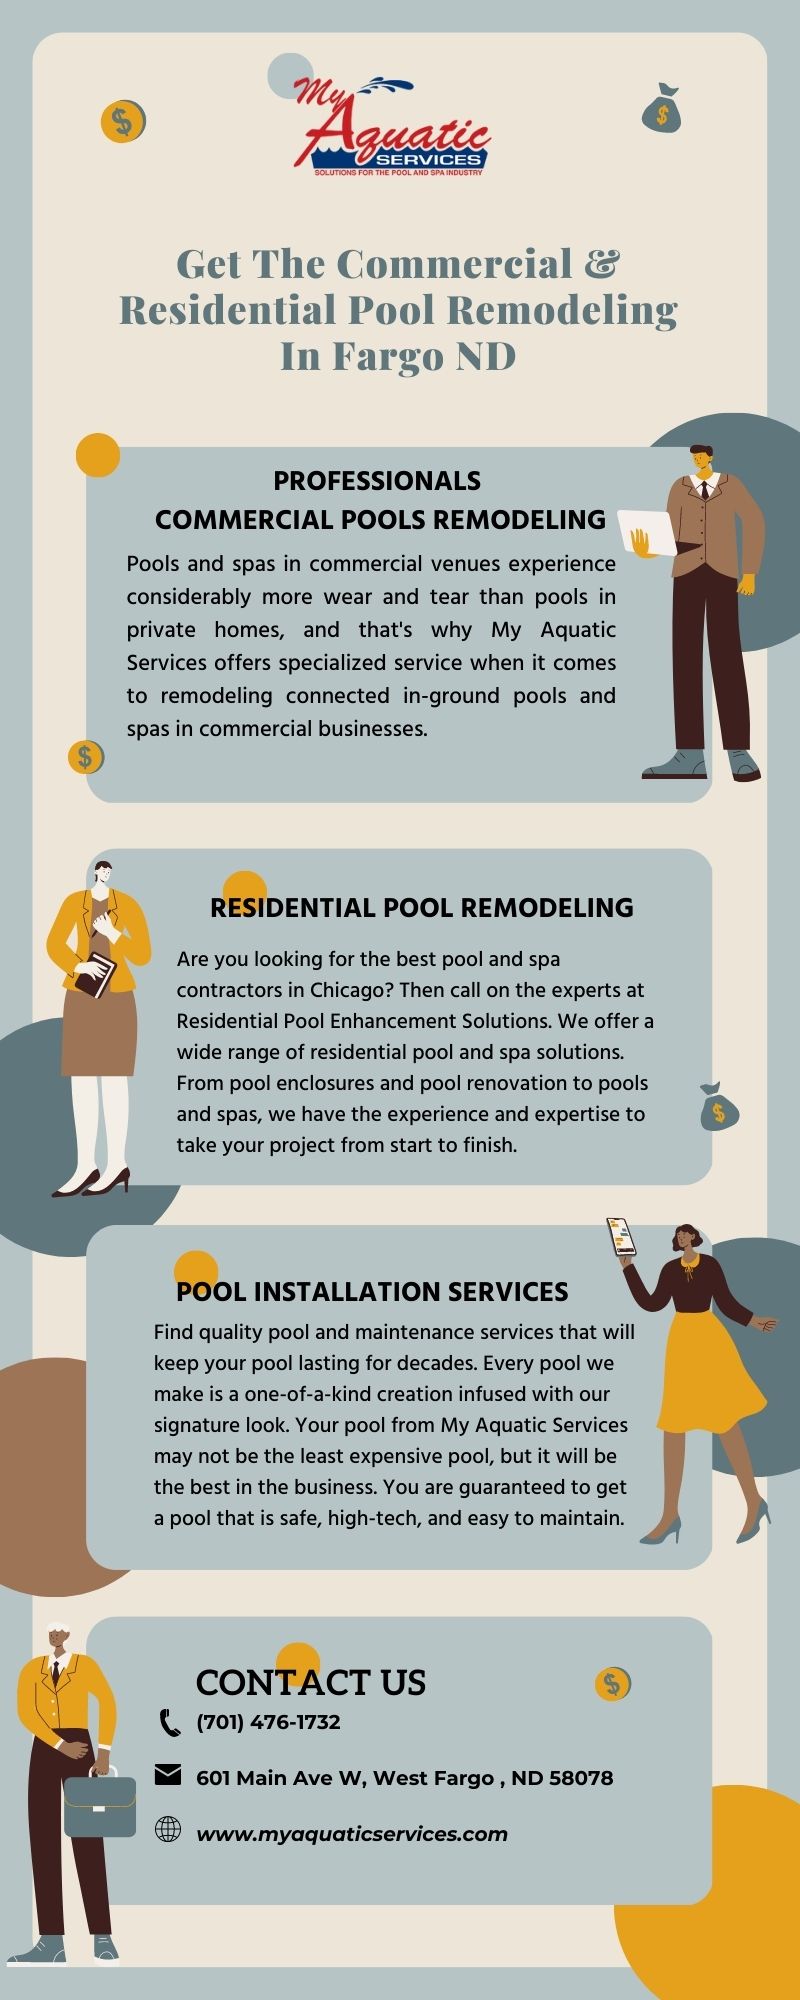 Get The Commercial & Residential Pool Remodeling In Fargo ND